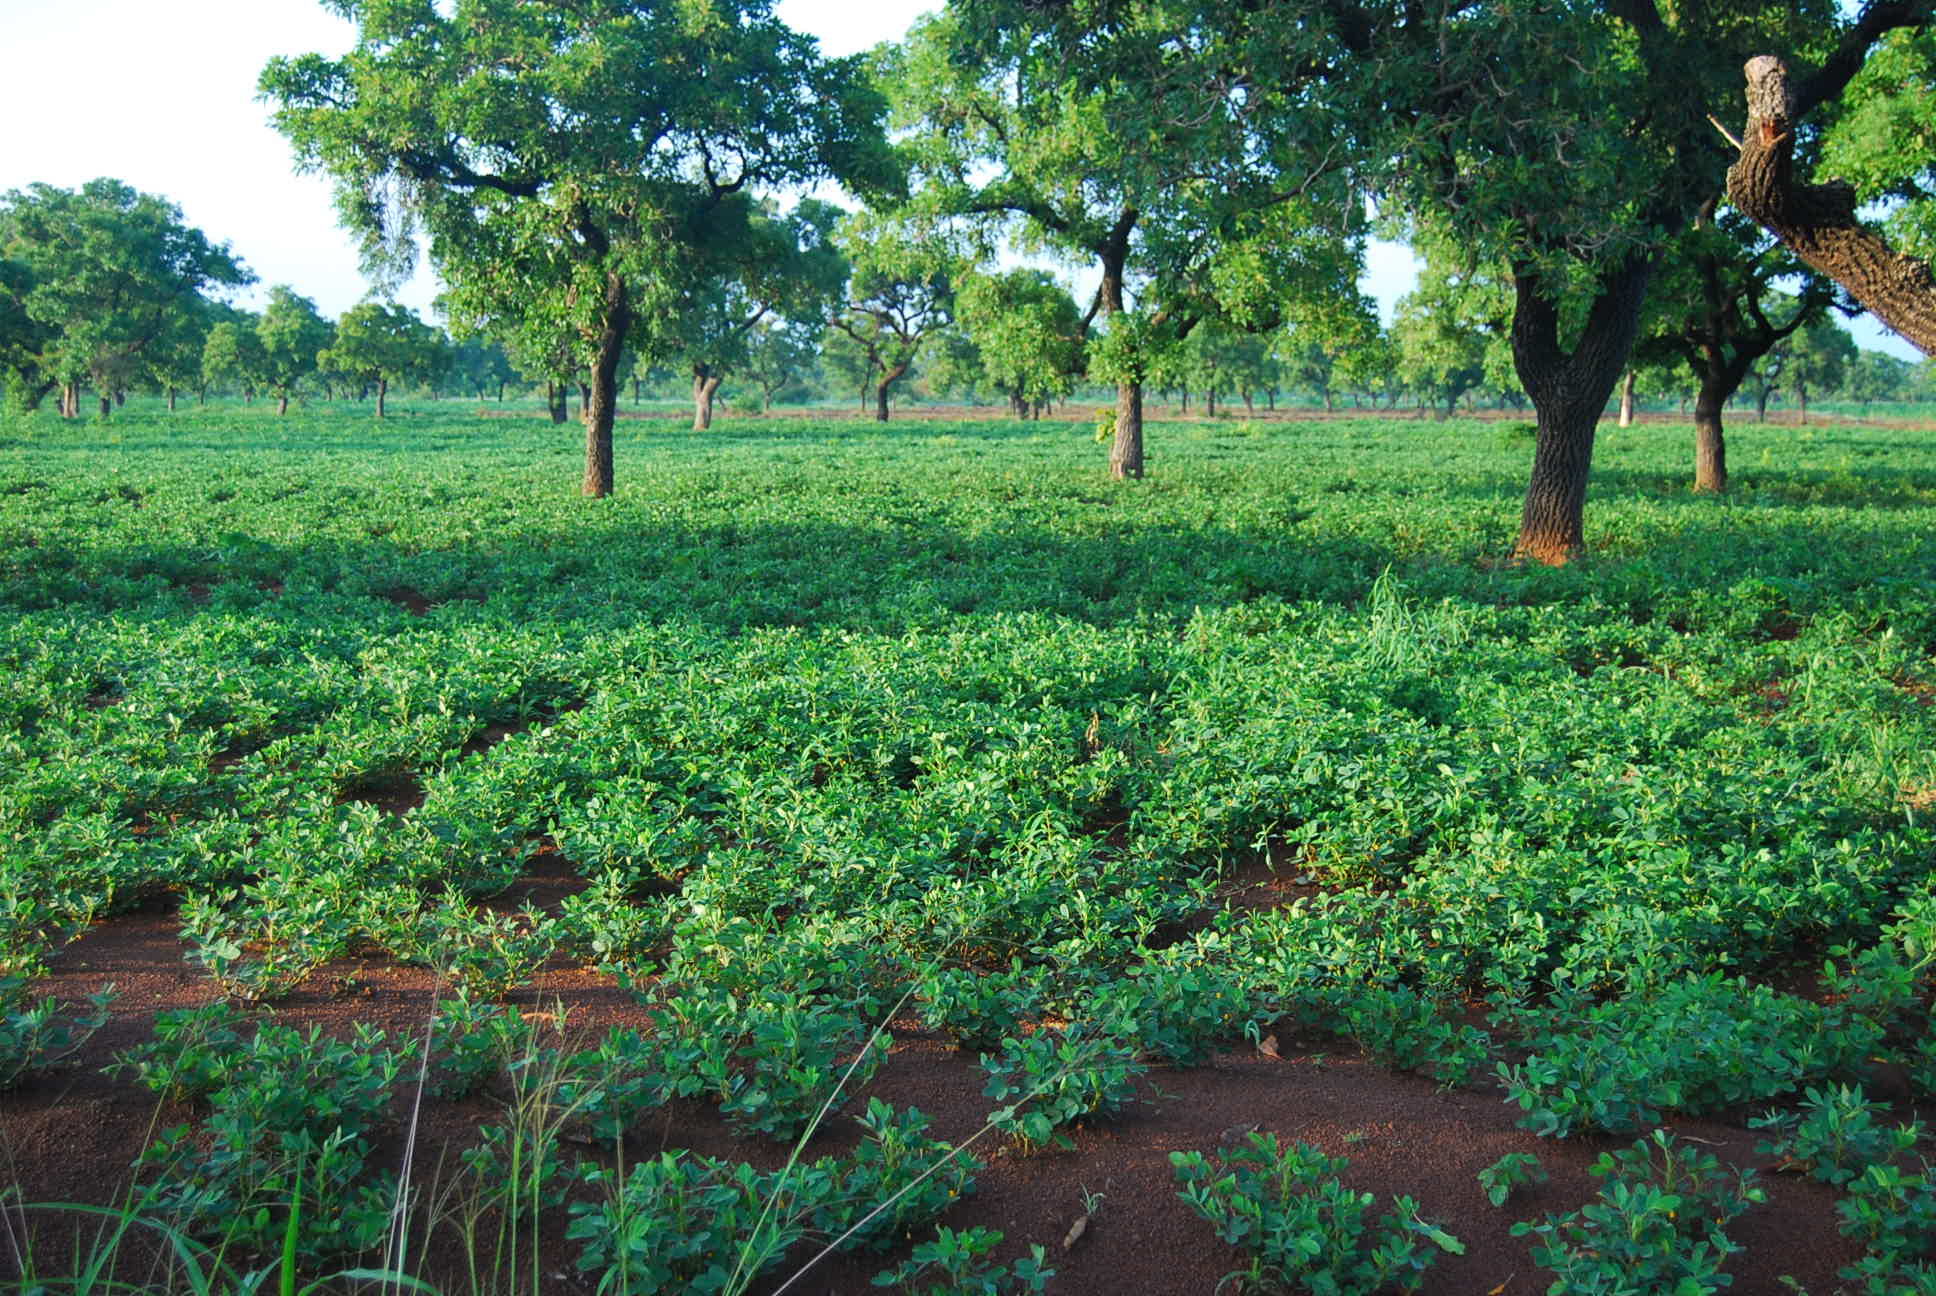 Cassava - The potato of the tropics as best alternative during global climate change